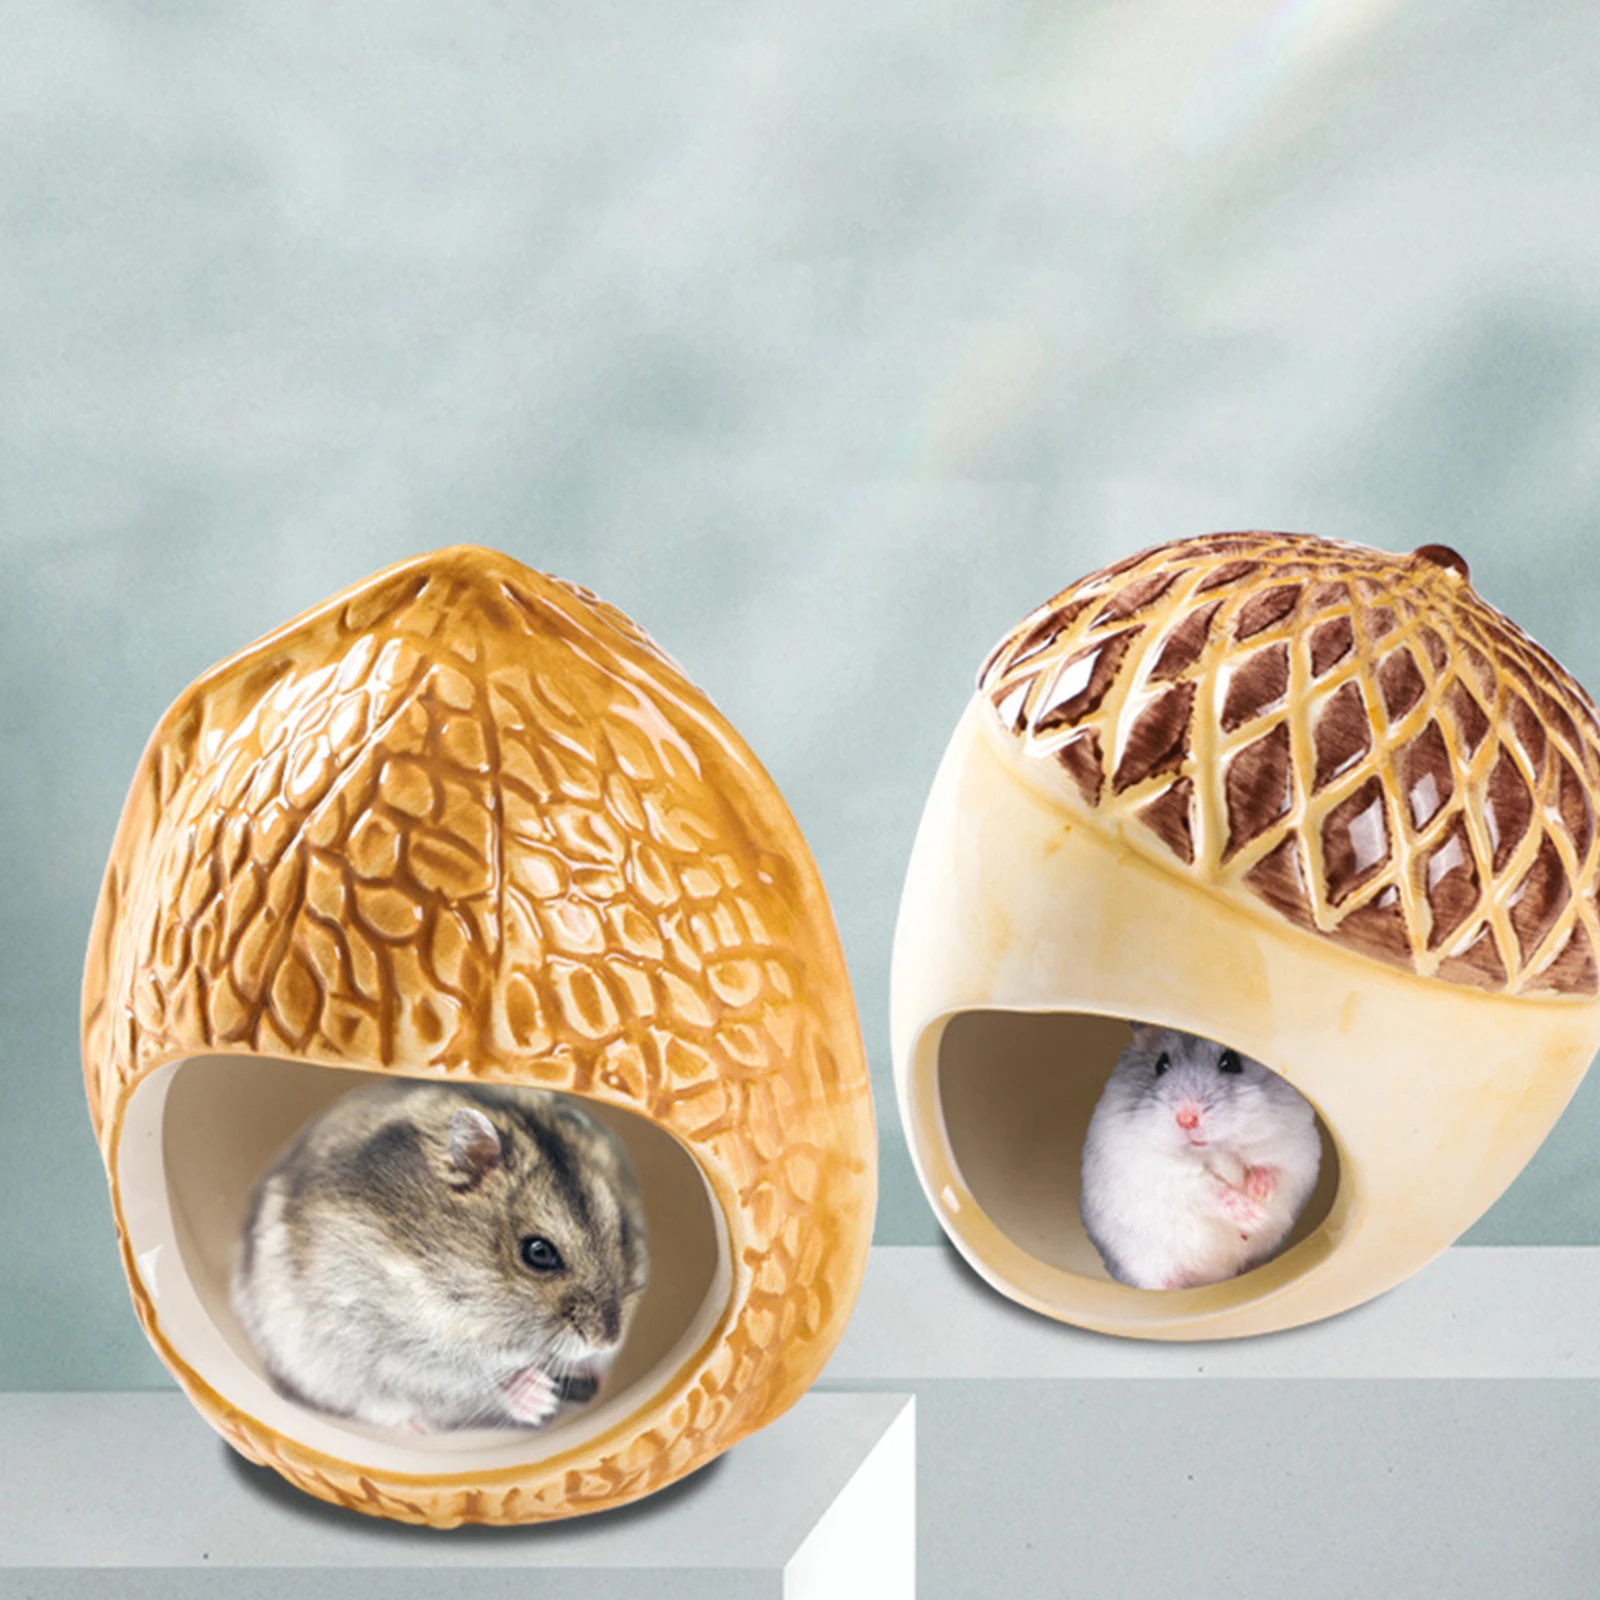 2 pcs Ceramic Hamster Hideout Nest House Toys Home Bath for Small Animals 